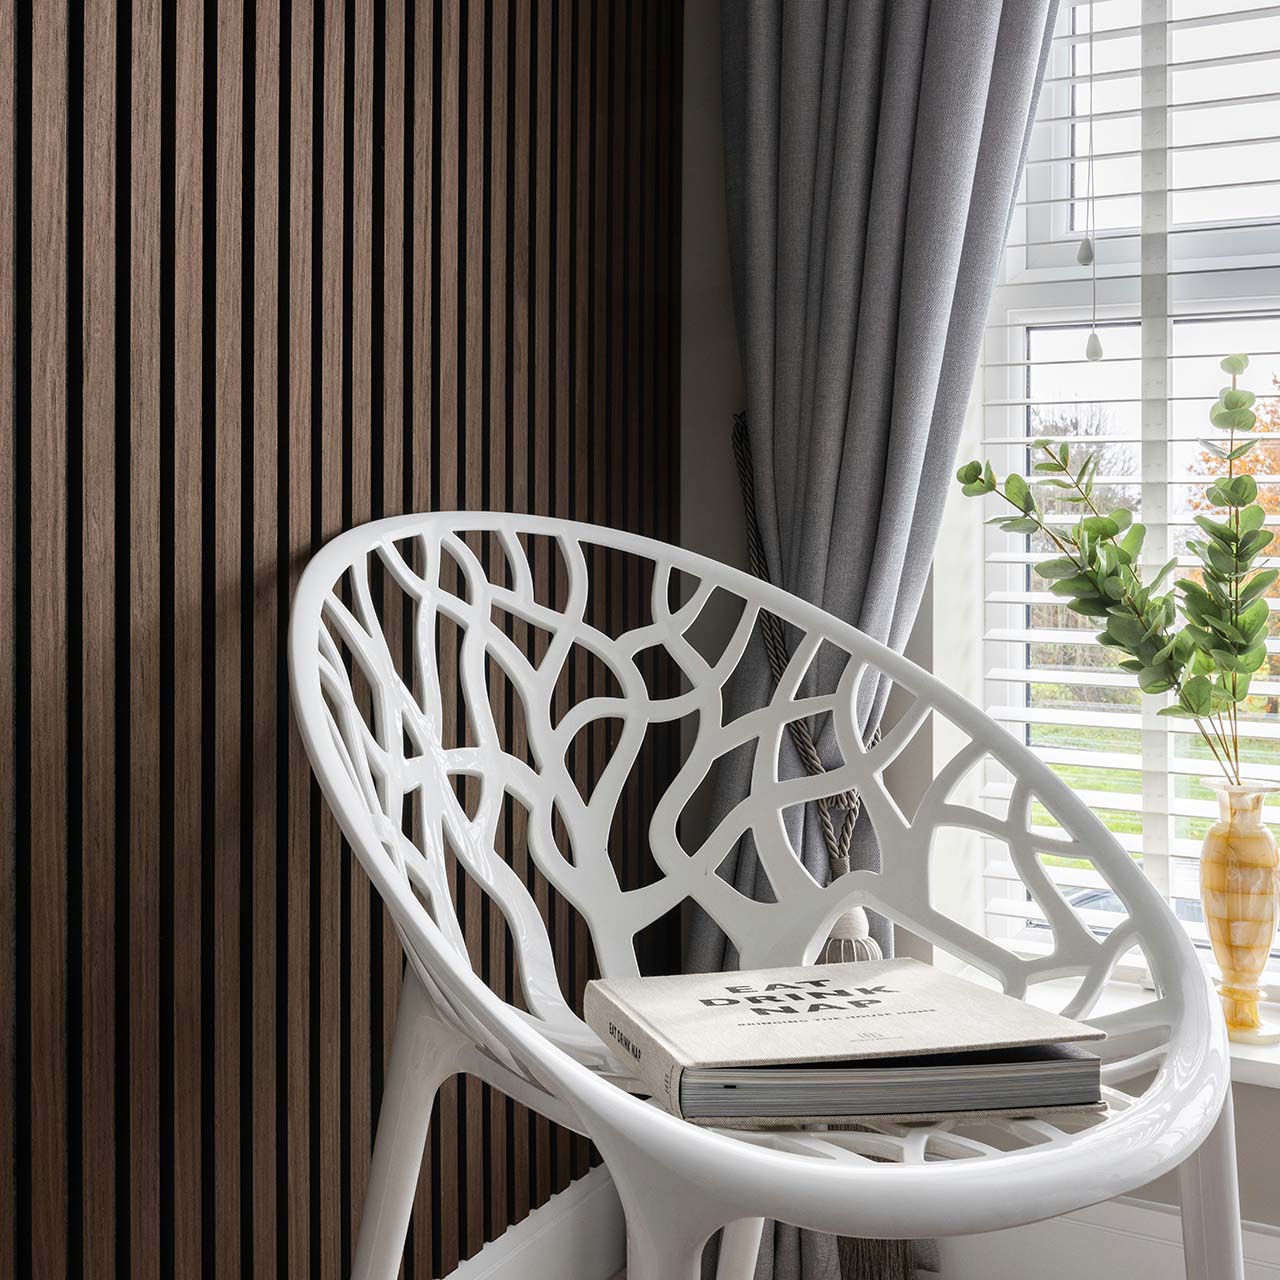 a white chair in front of a wood panelled wall - ideas to liven up a bare wall